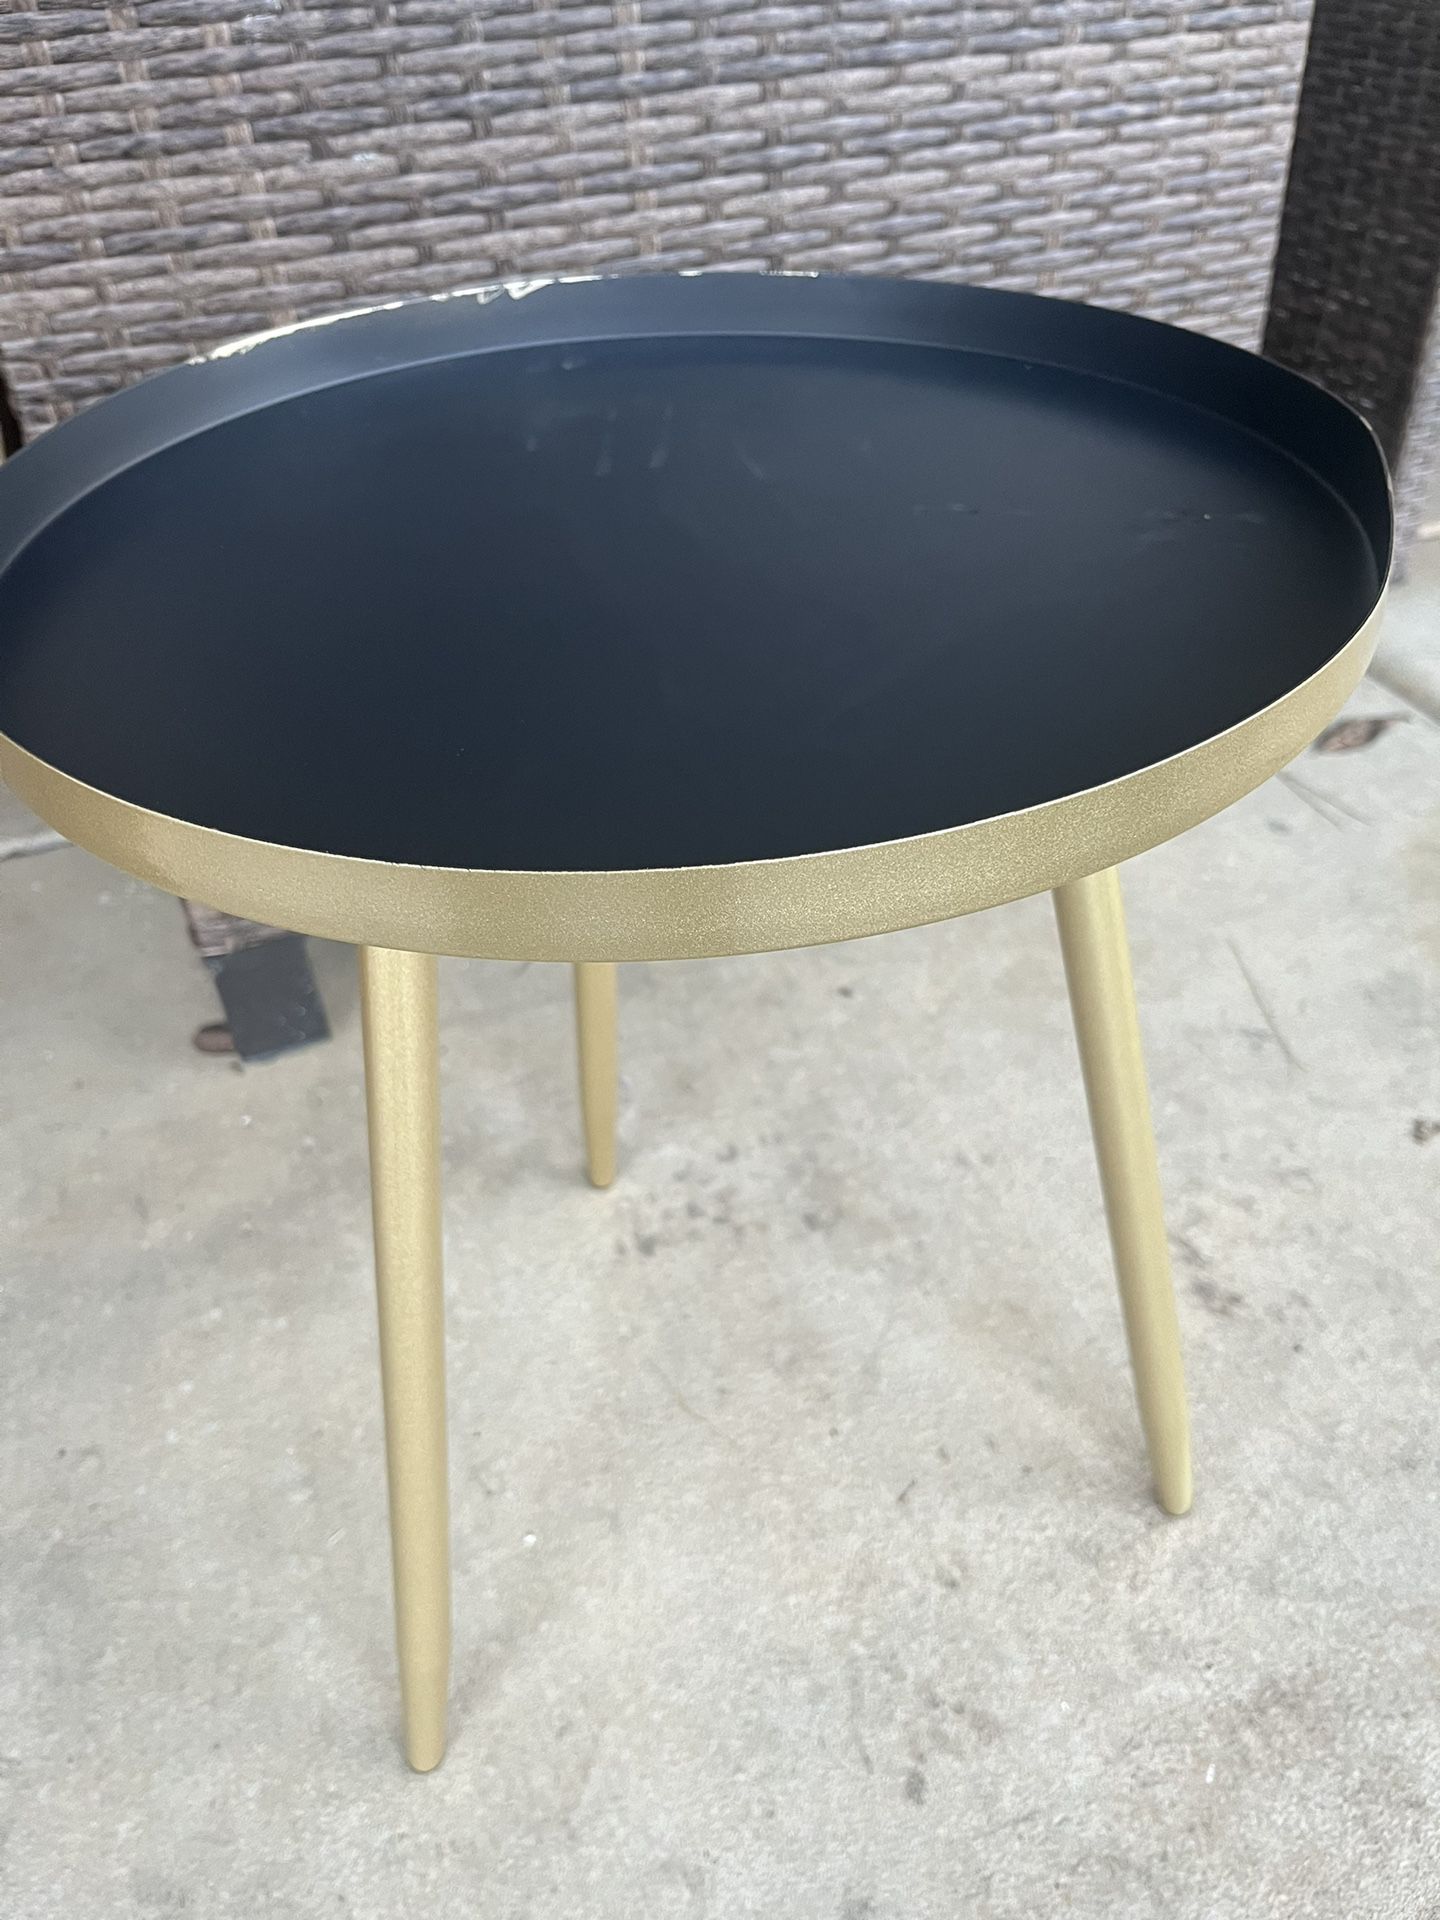 Gold Side Table Sofa Table 